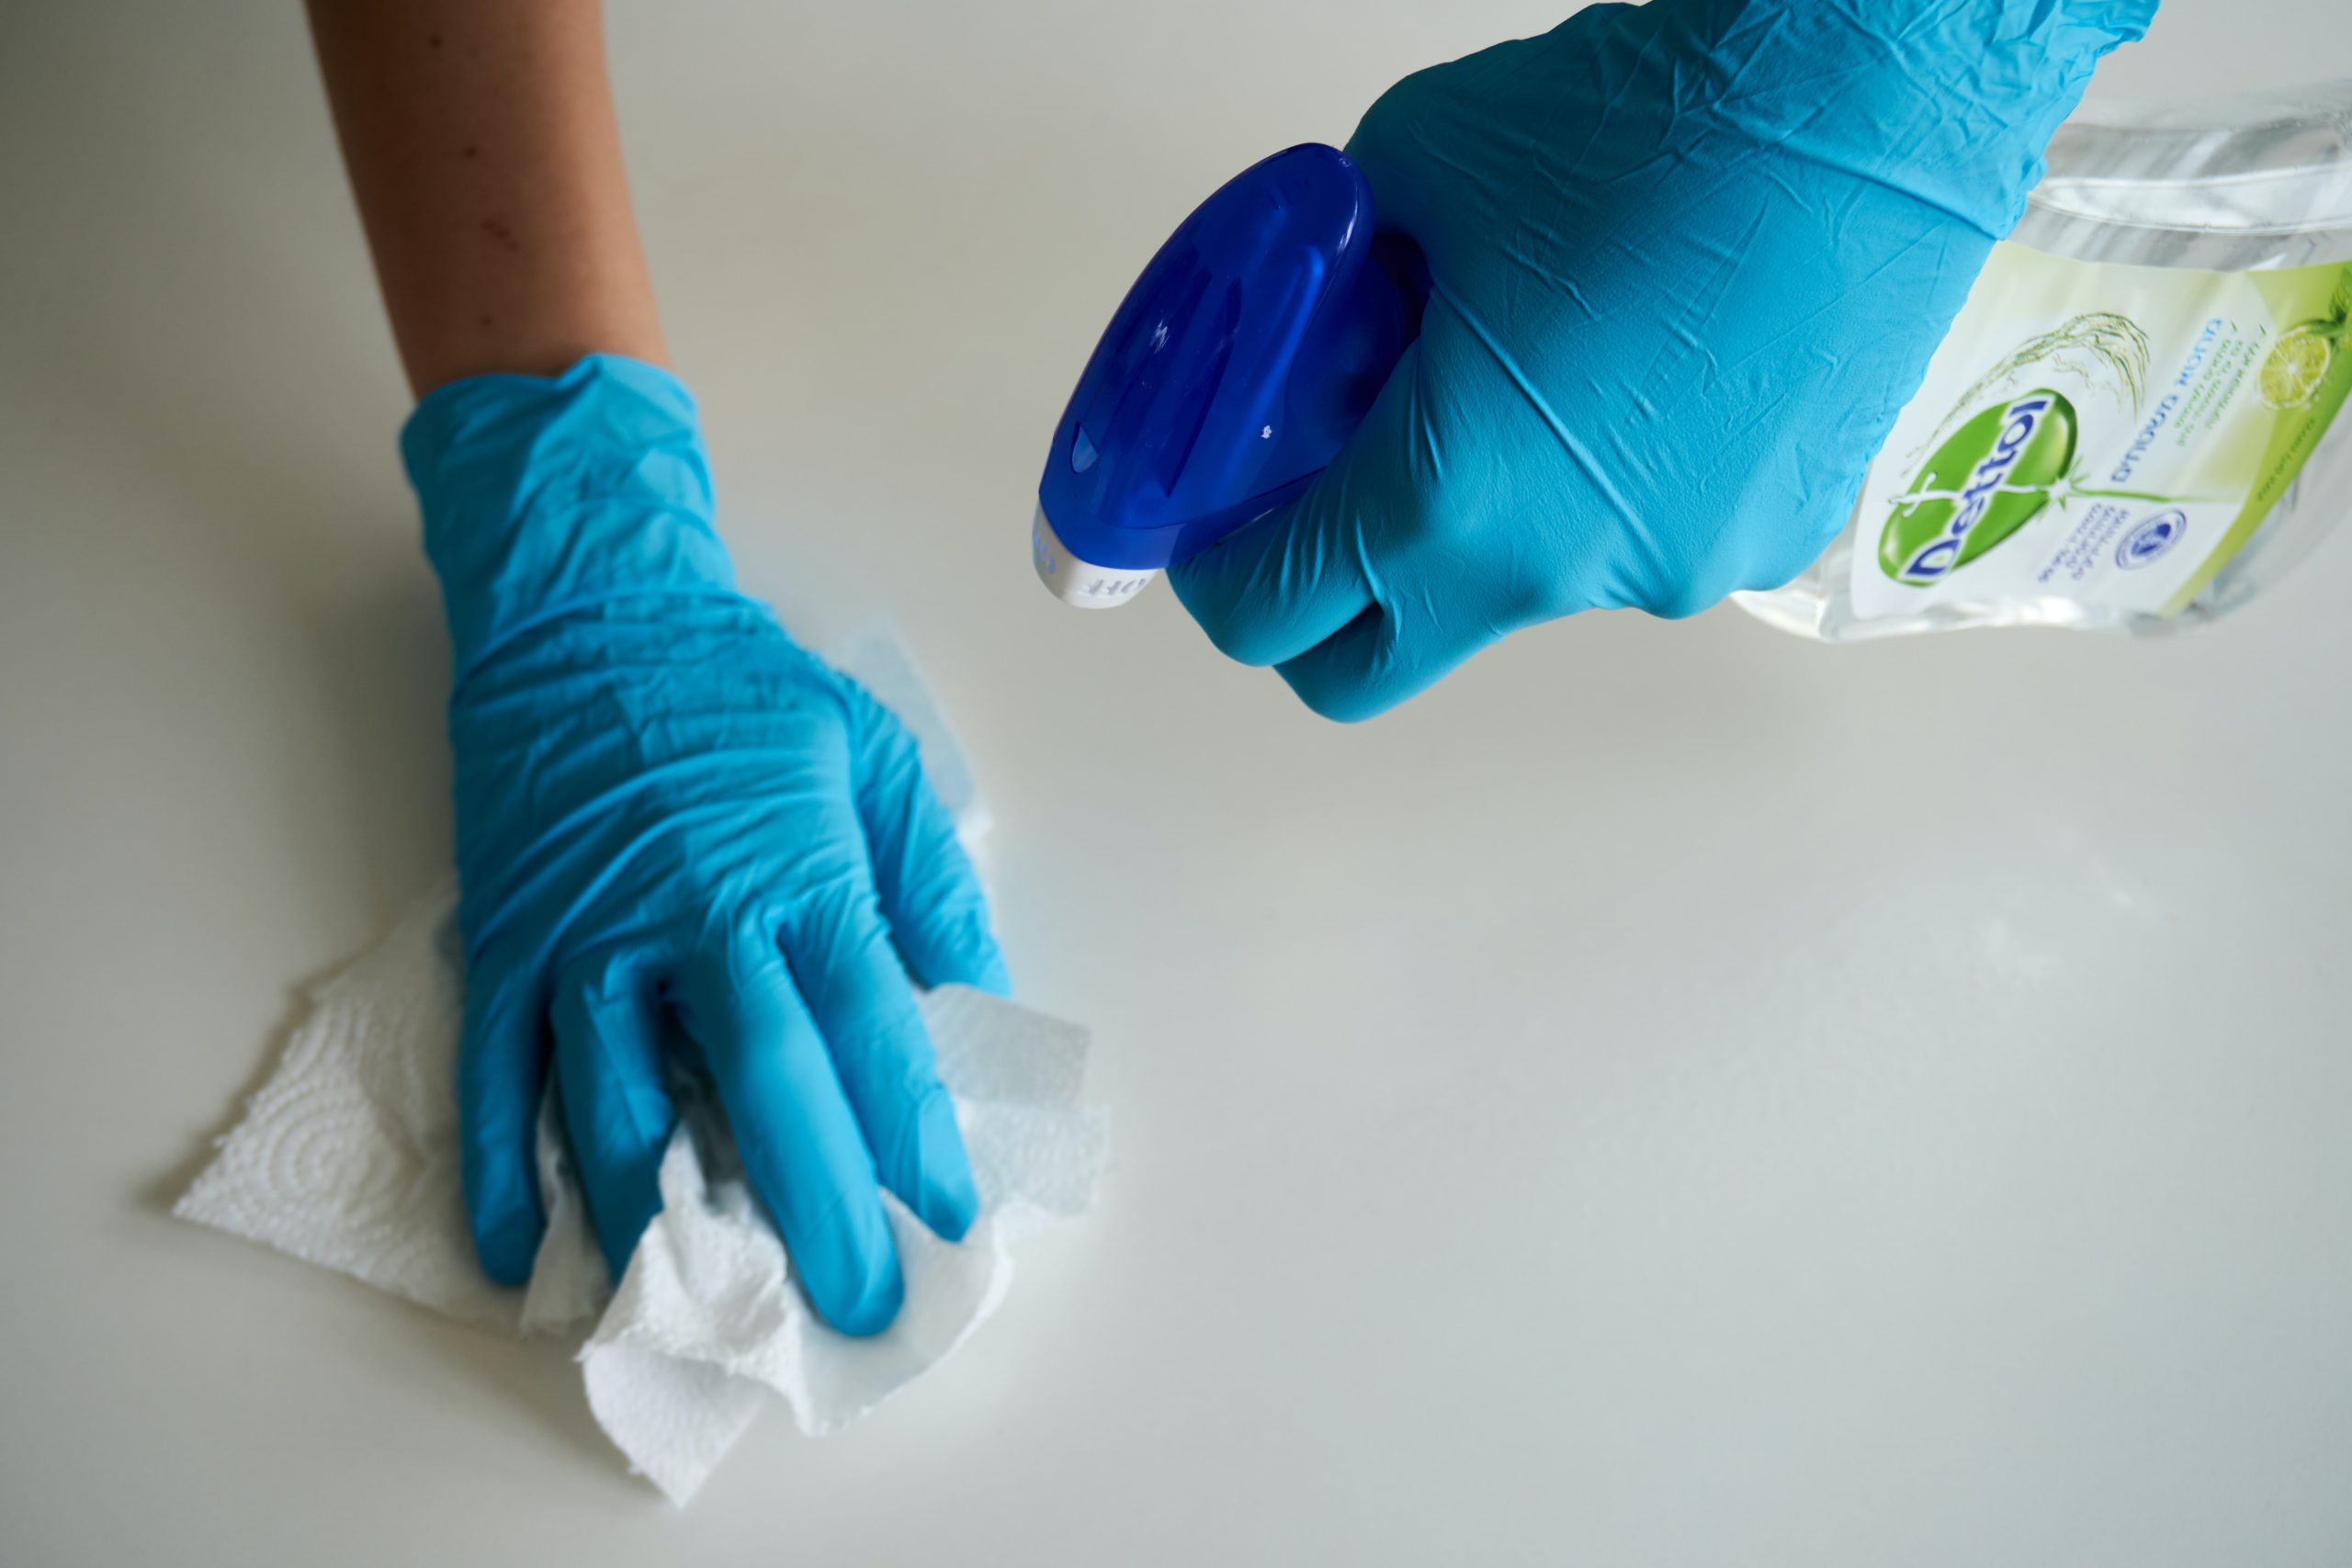 Hands covered with gloves cleaning a counter with spray and paper towel.